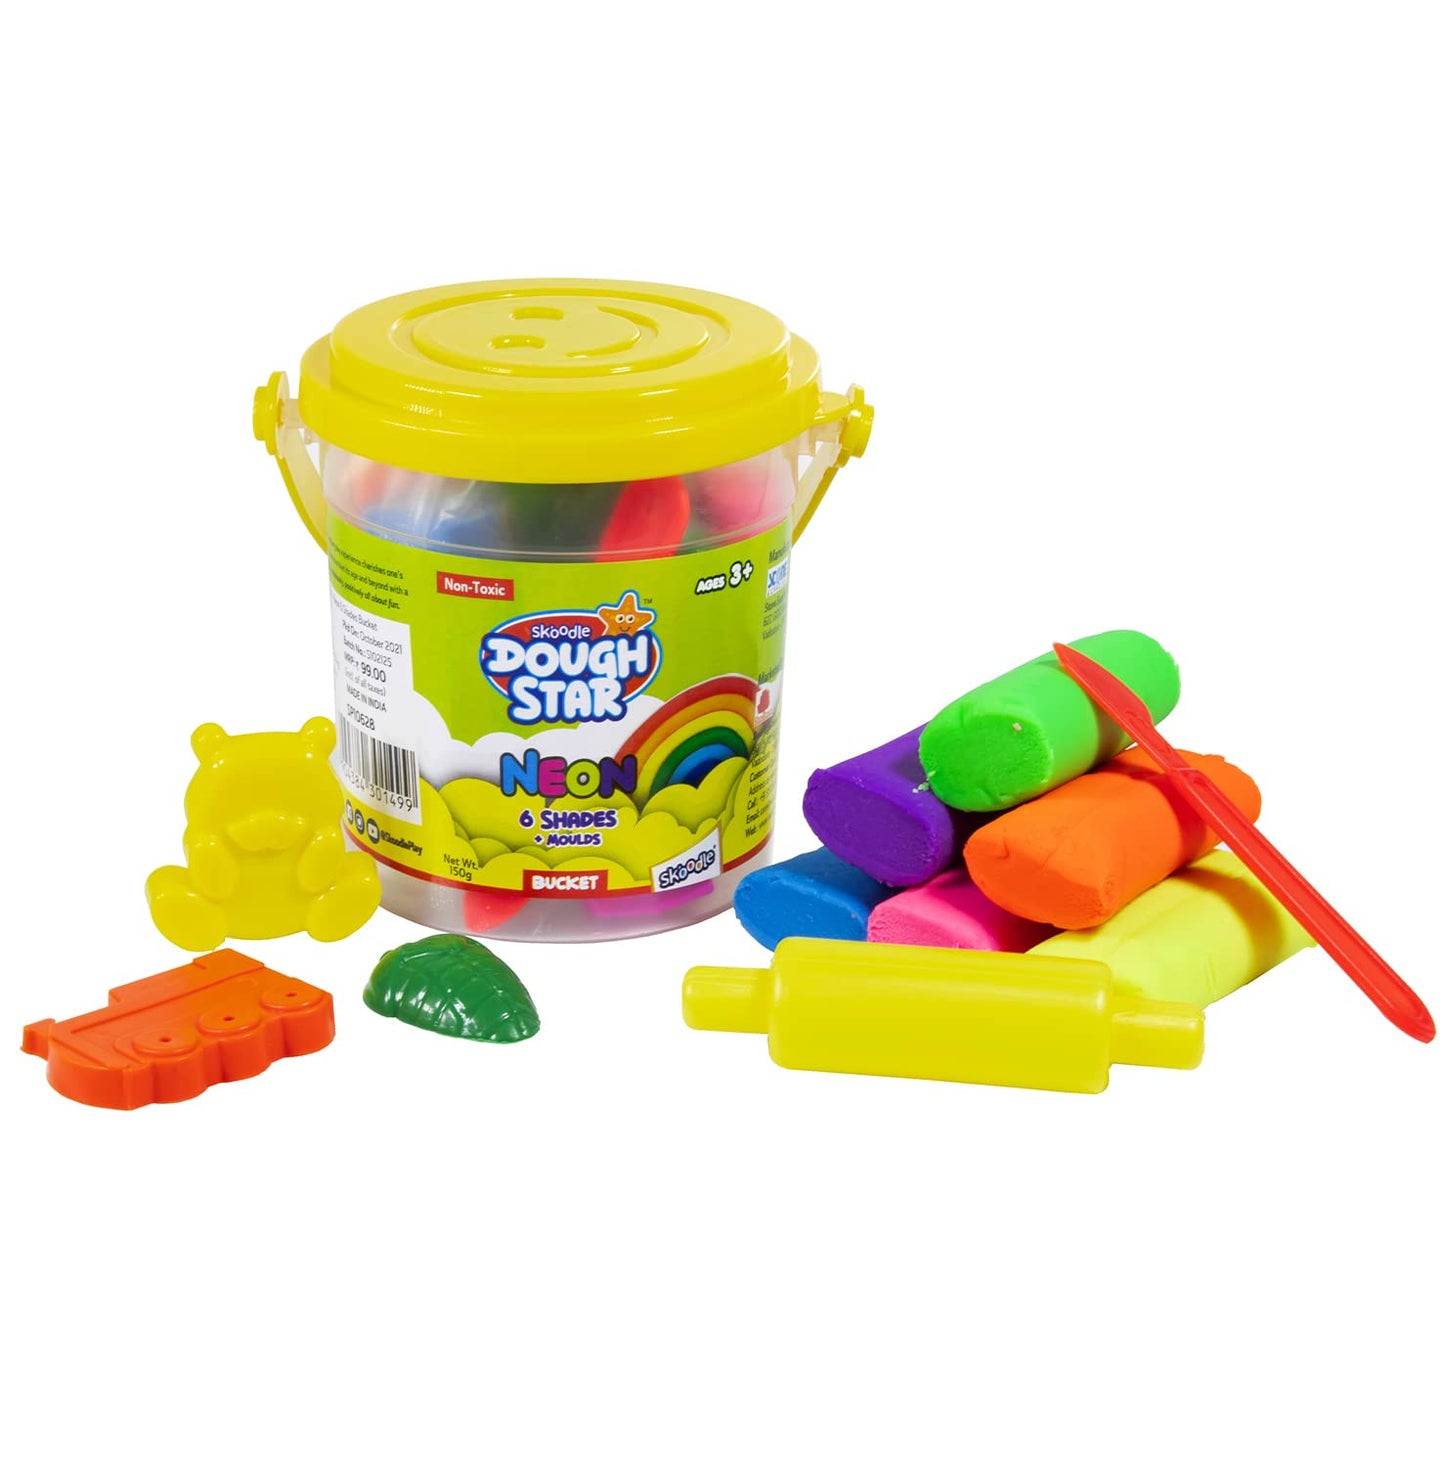 Skoodle Modelling Neon Dough Set With Moldes (25 GM x 6 Shades) For Kids - Multicolor